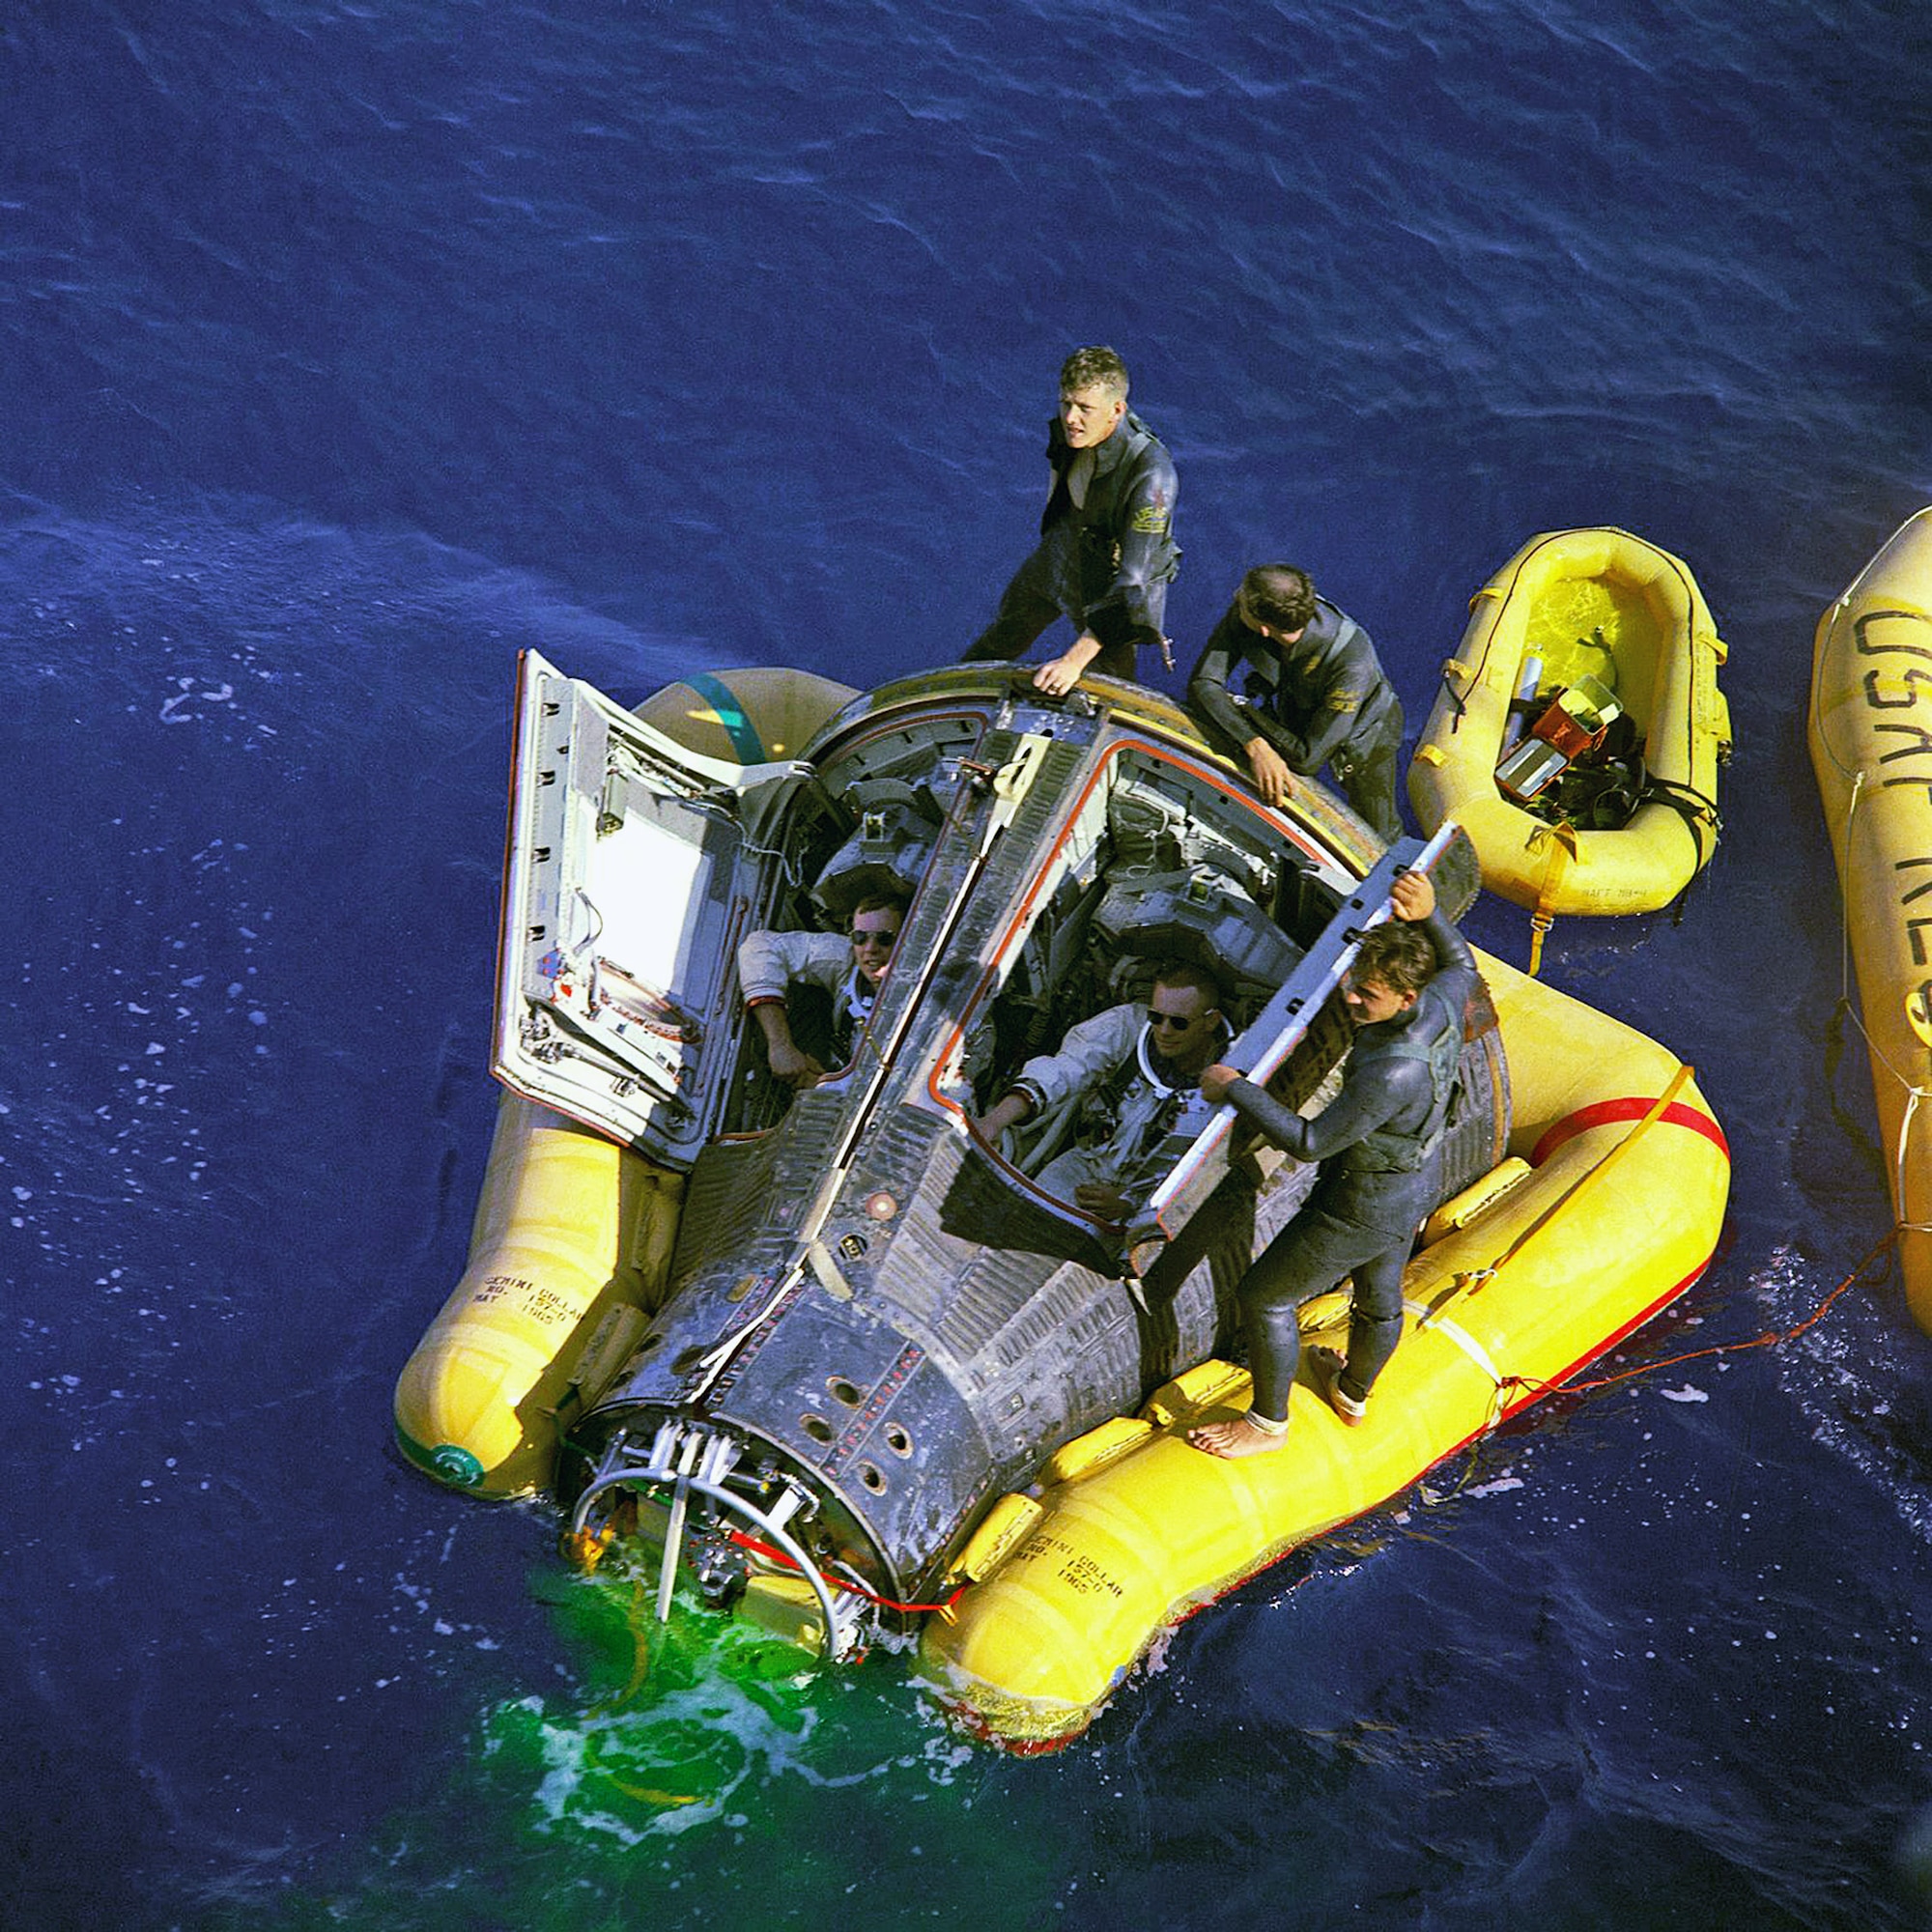 Air Force pararescuemen flank Astronauts Neil A. Armstrong and David R. Scott, sitting in the Gemini 8 space craft, while awaiting the arrival of the recovery ship, the USS Leonard F. Mason after splashdown in the Pacific Ocean March 16, 1966, in the Philippine Sea. Reservists from the 920th Rescue Wing at Patrick Air Force Base, Fla., provide first-response contingency medical and rescue support for all NASA shuttle launches. With the advent of the NASA's new capsule-based, manned-spaceflight program, Constellation, Air Force pararescuemen will once again greet astronauts on the high seas following splashdown. (NASA photo) 